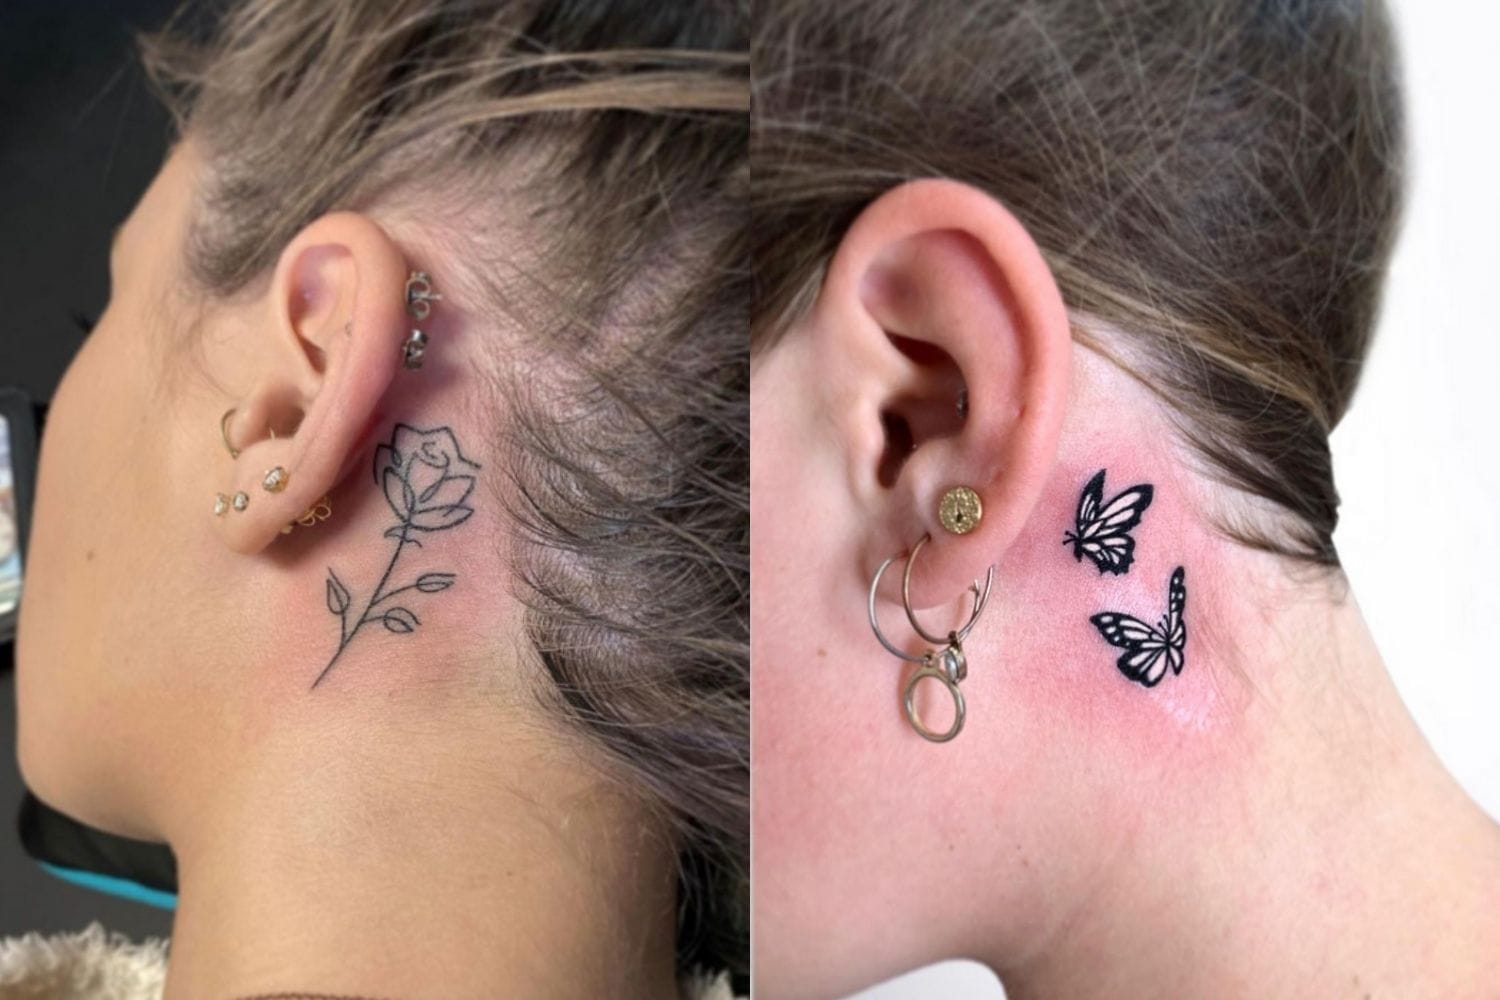 Justin Bieber Shows Off Simple Music Treble Clef Tattoo Behind His Ear  PopStarTats